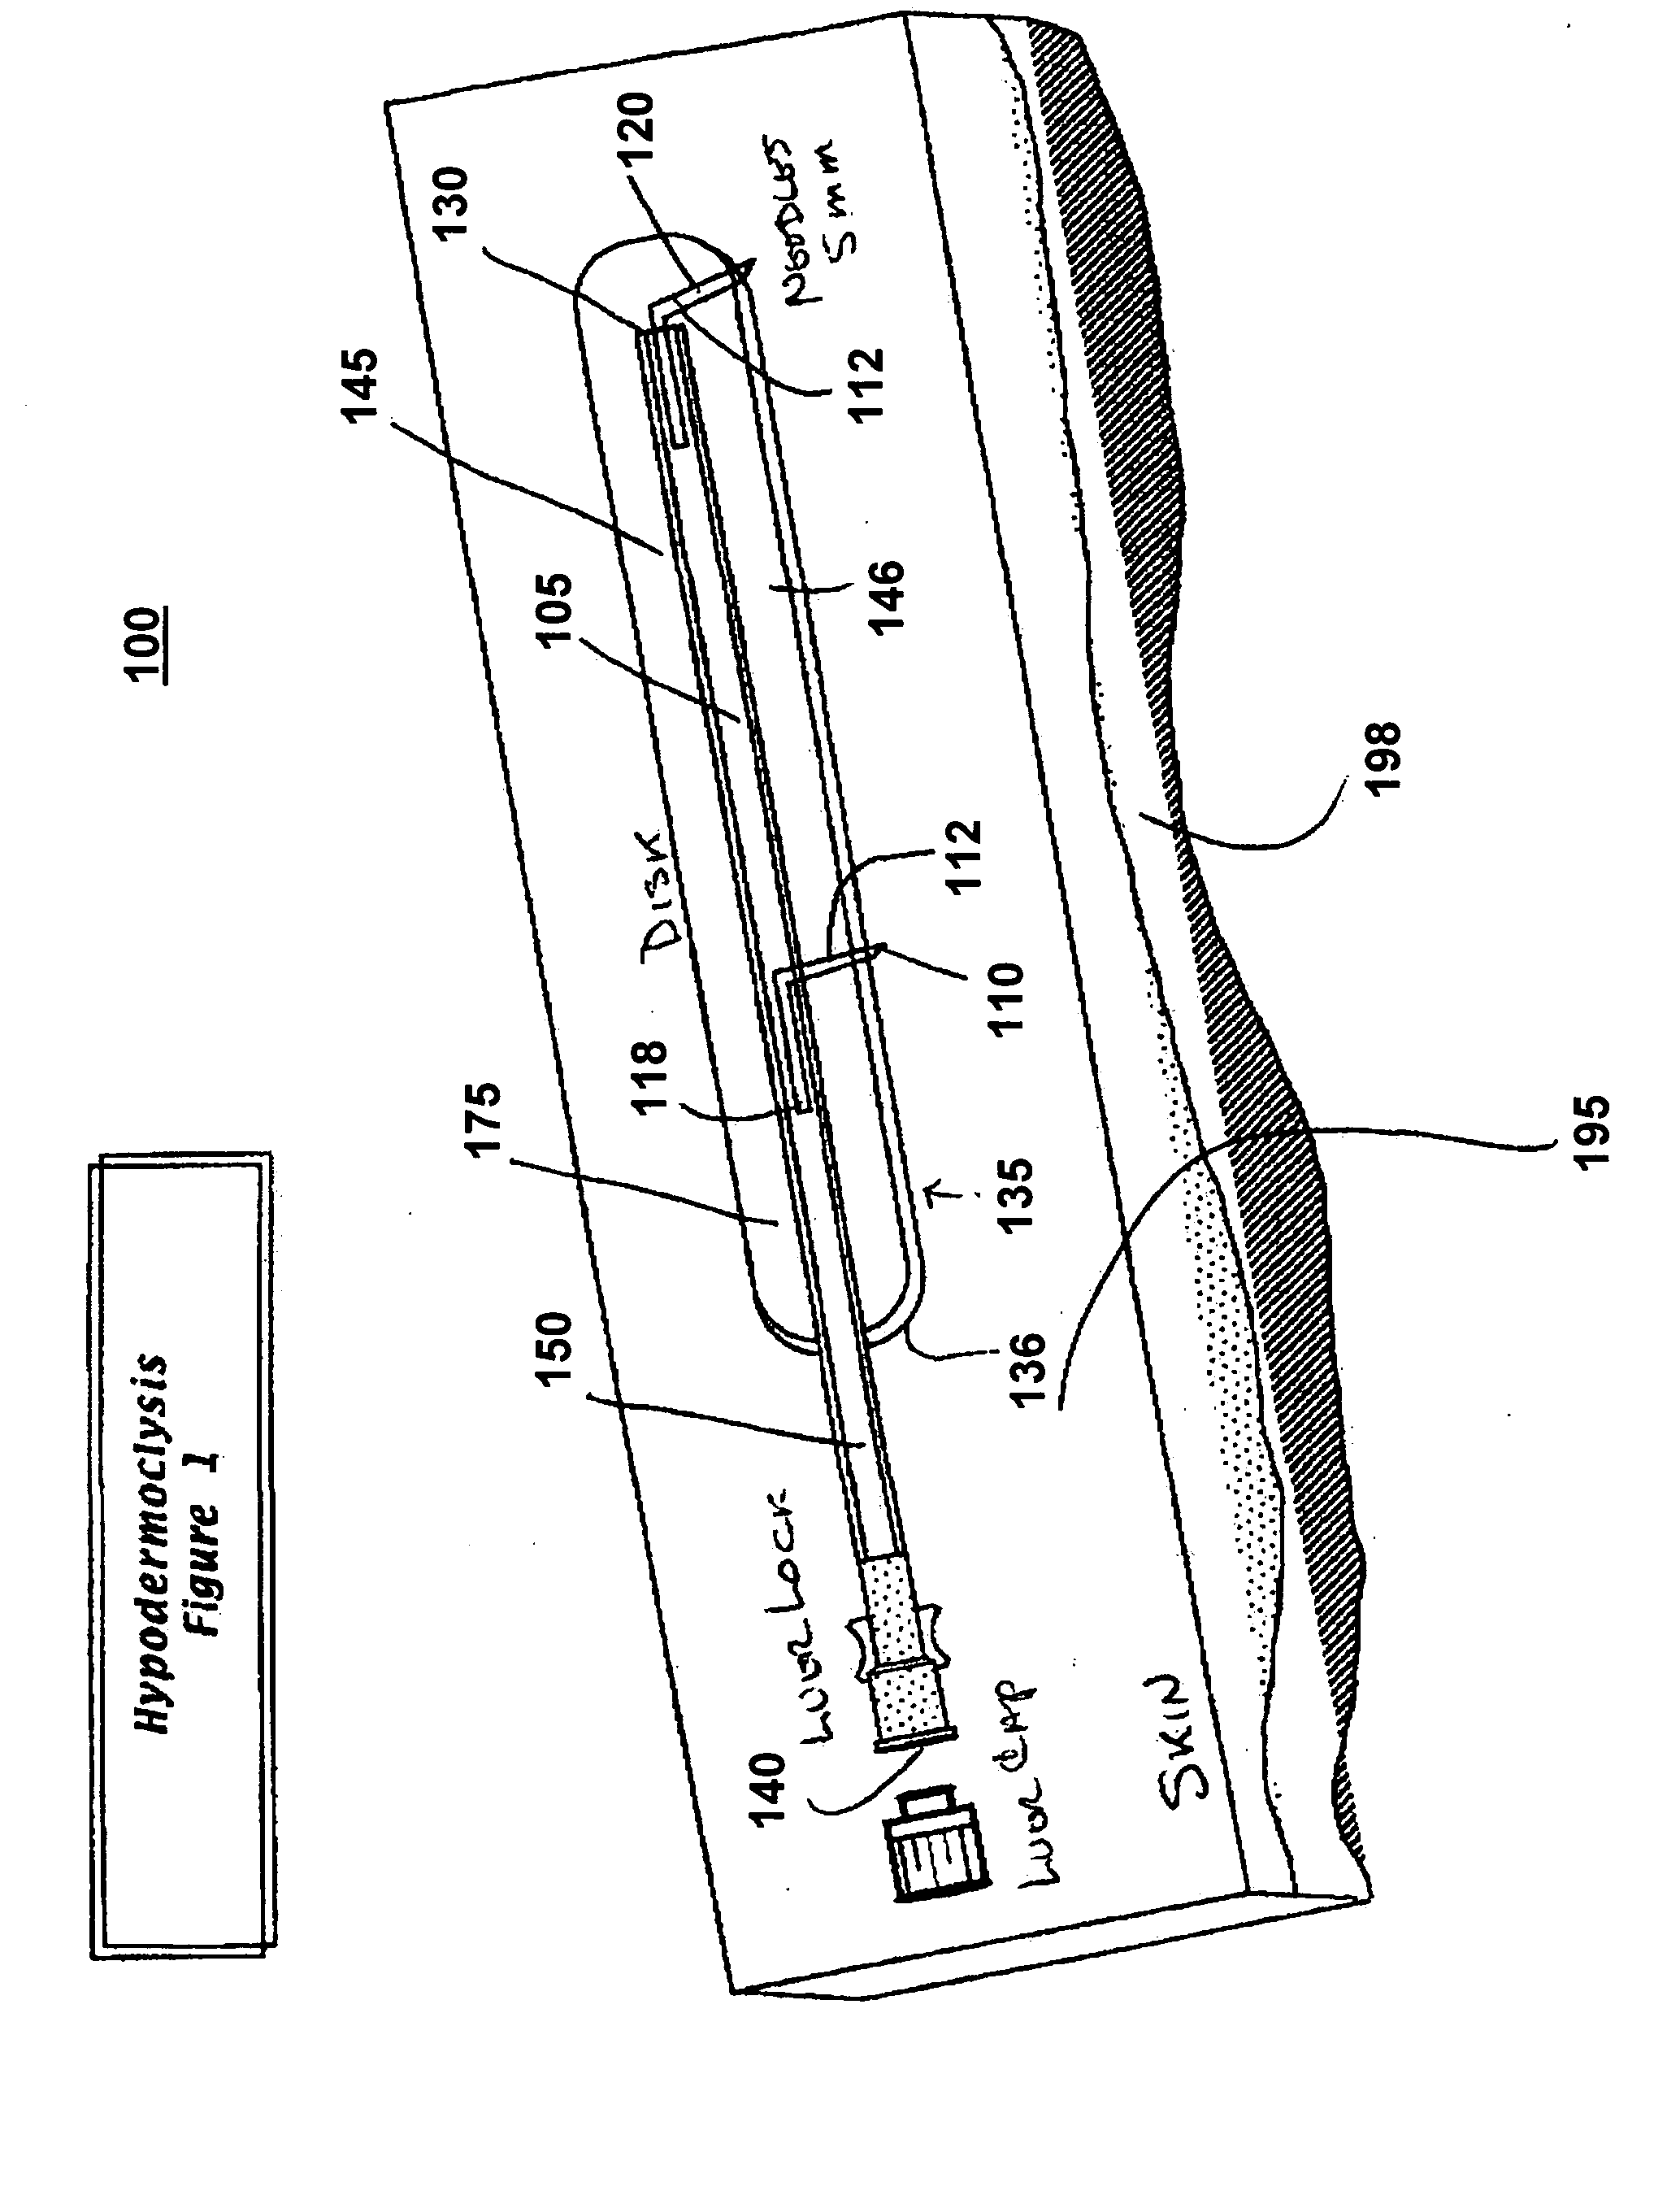 Device for subcutaneous infusion of fluids